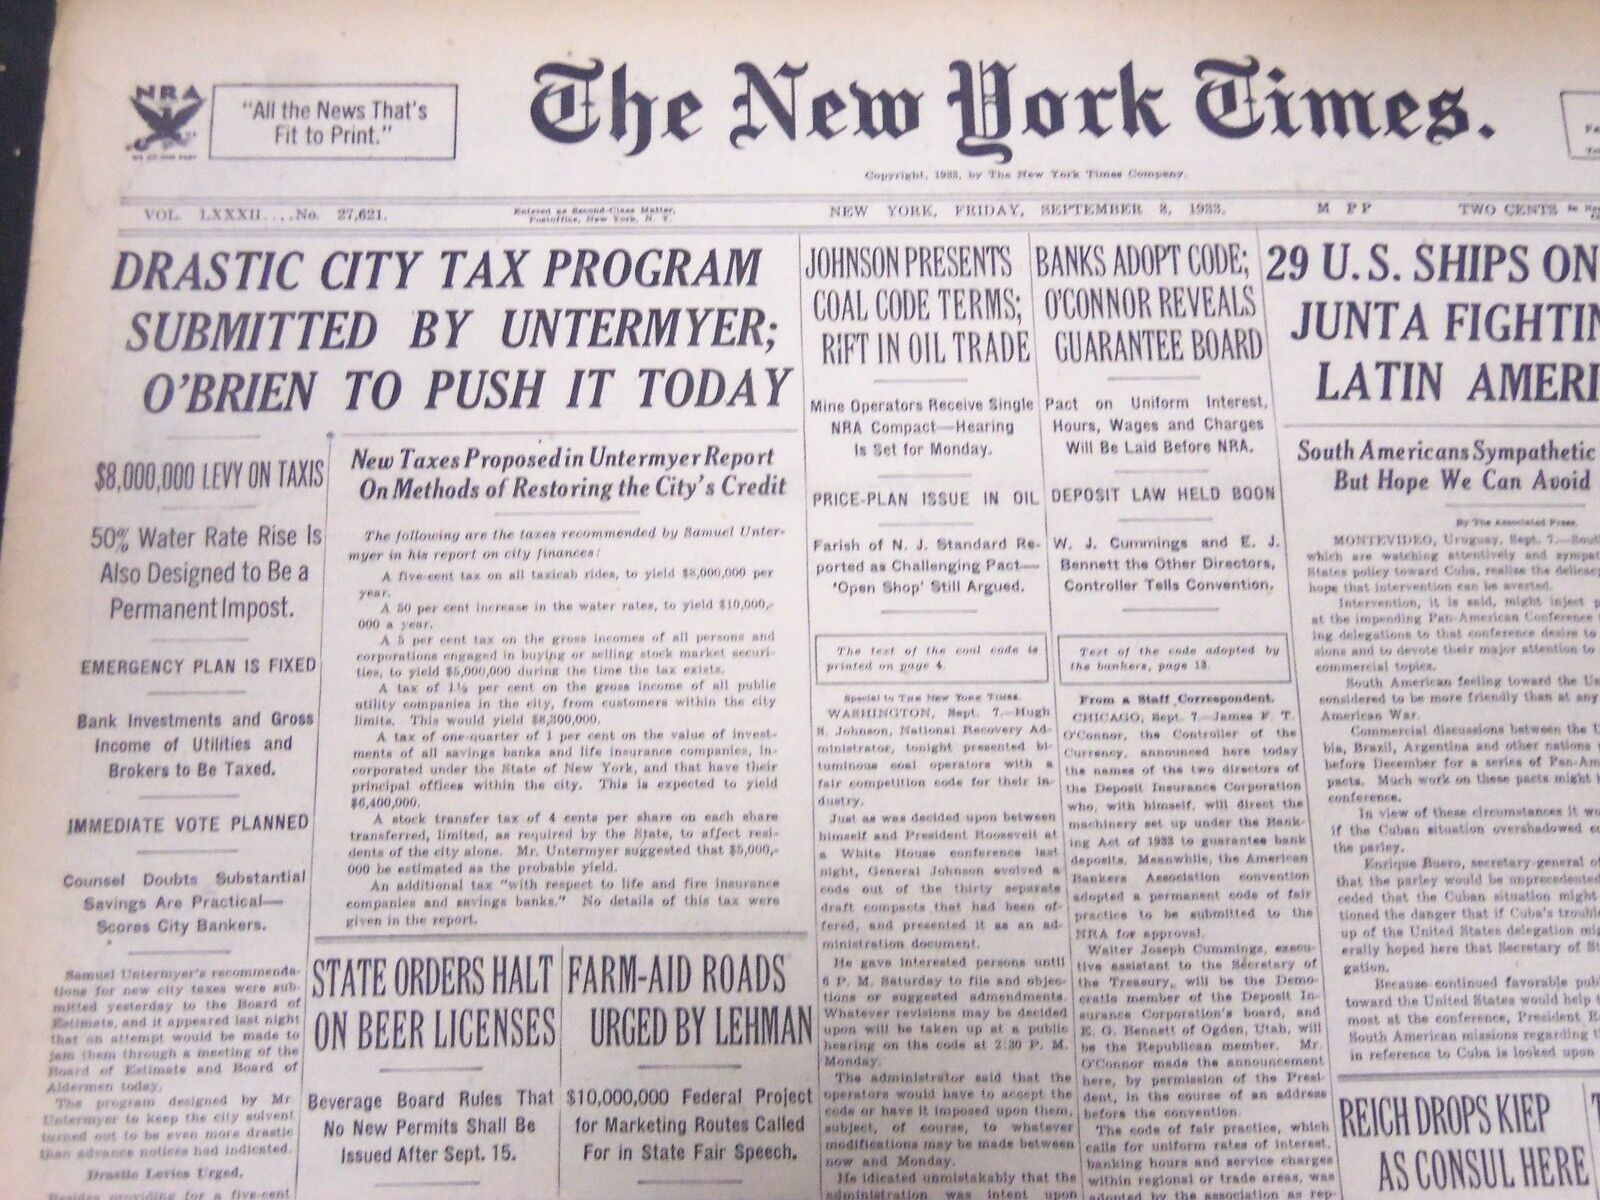 1933 SEPT 8 NEW YORK TIMES - CITY TAX PROGRAM SUBMITTED BY UNTERMEYER - NT 5260